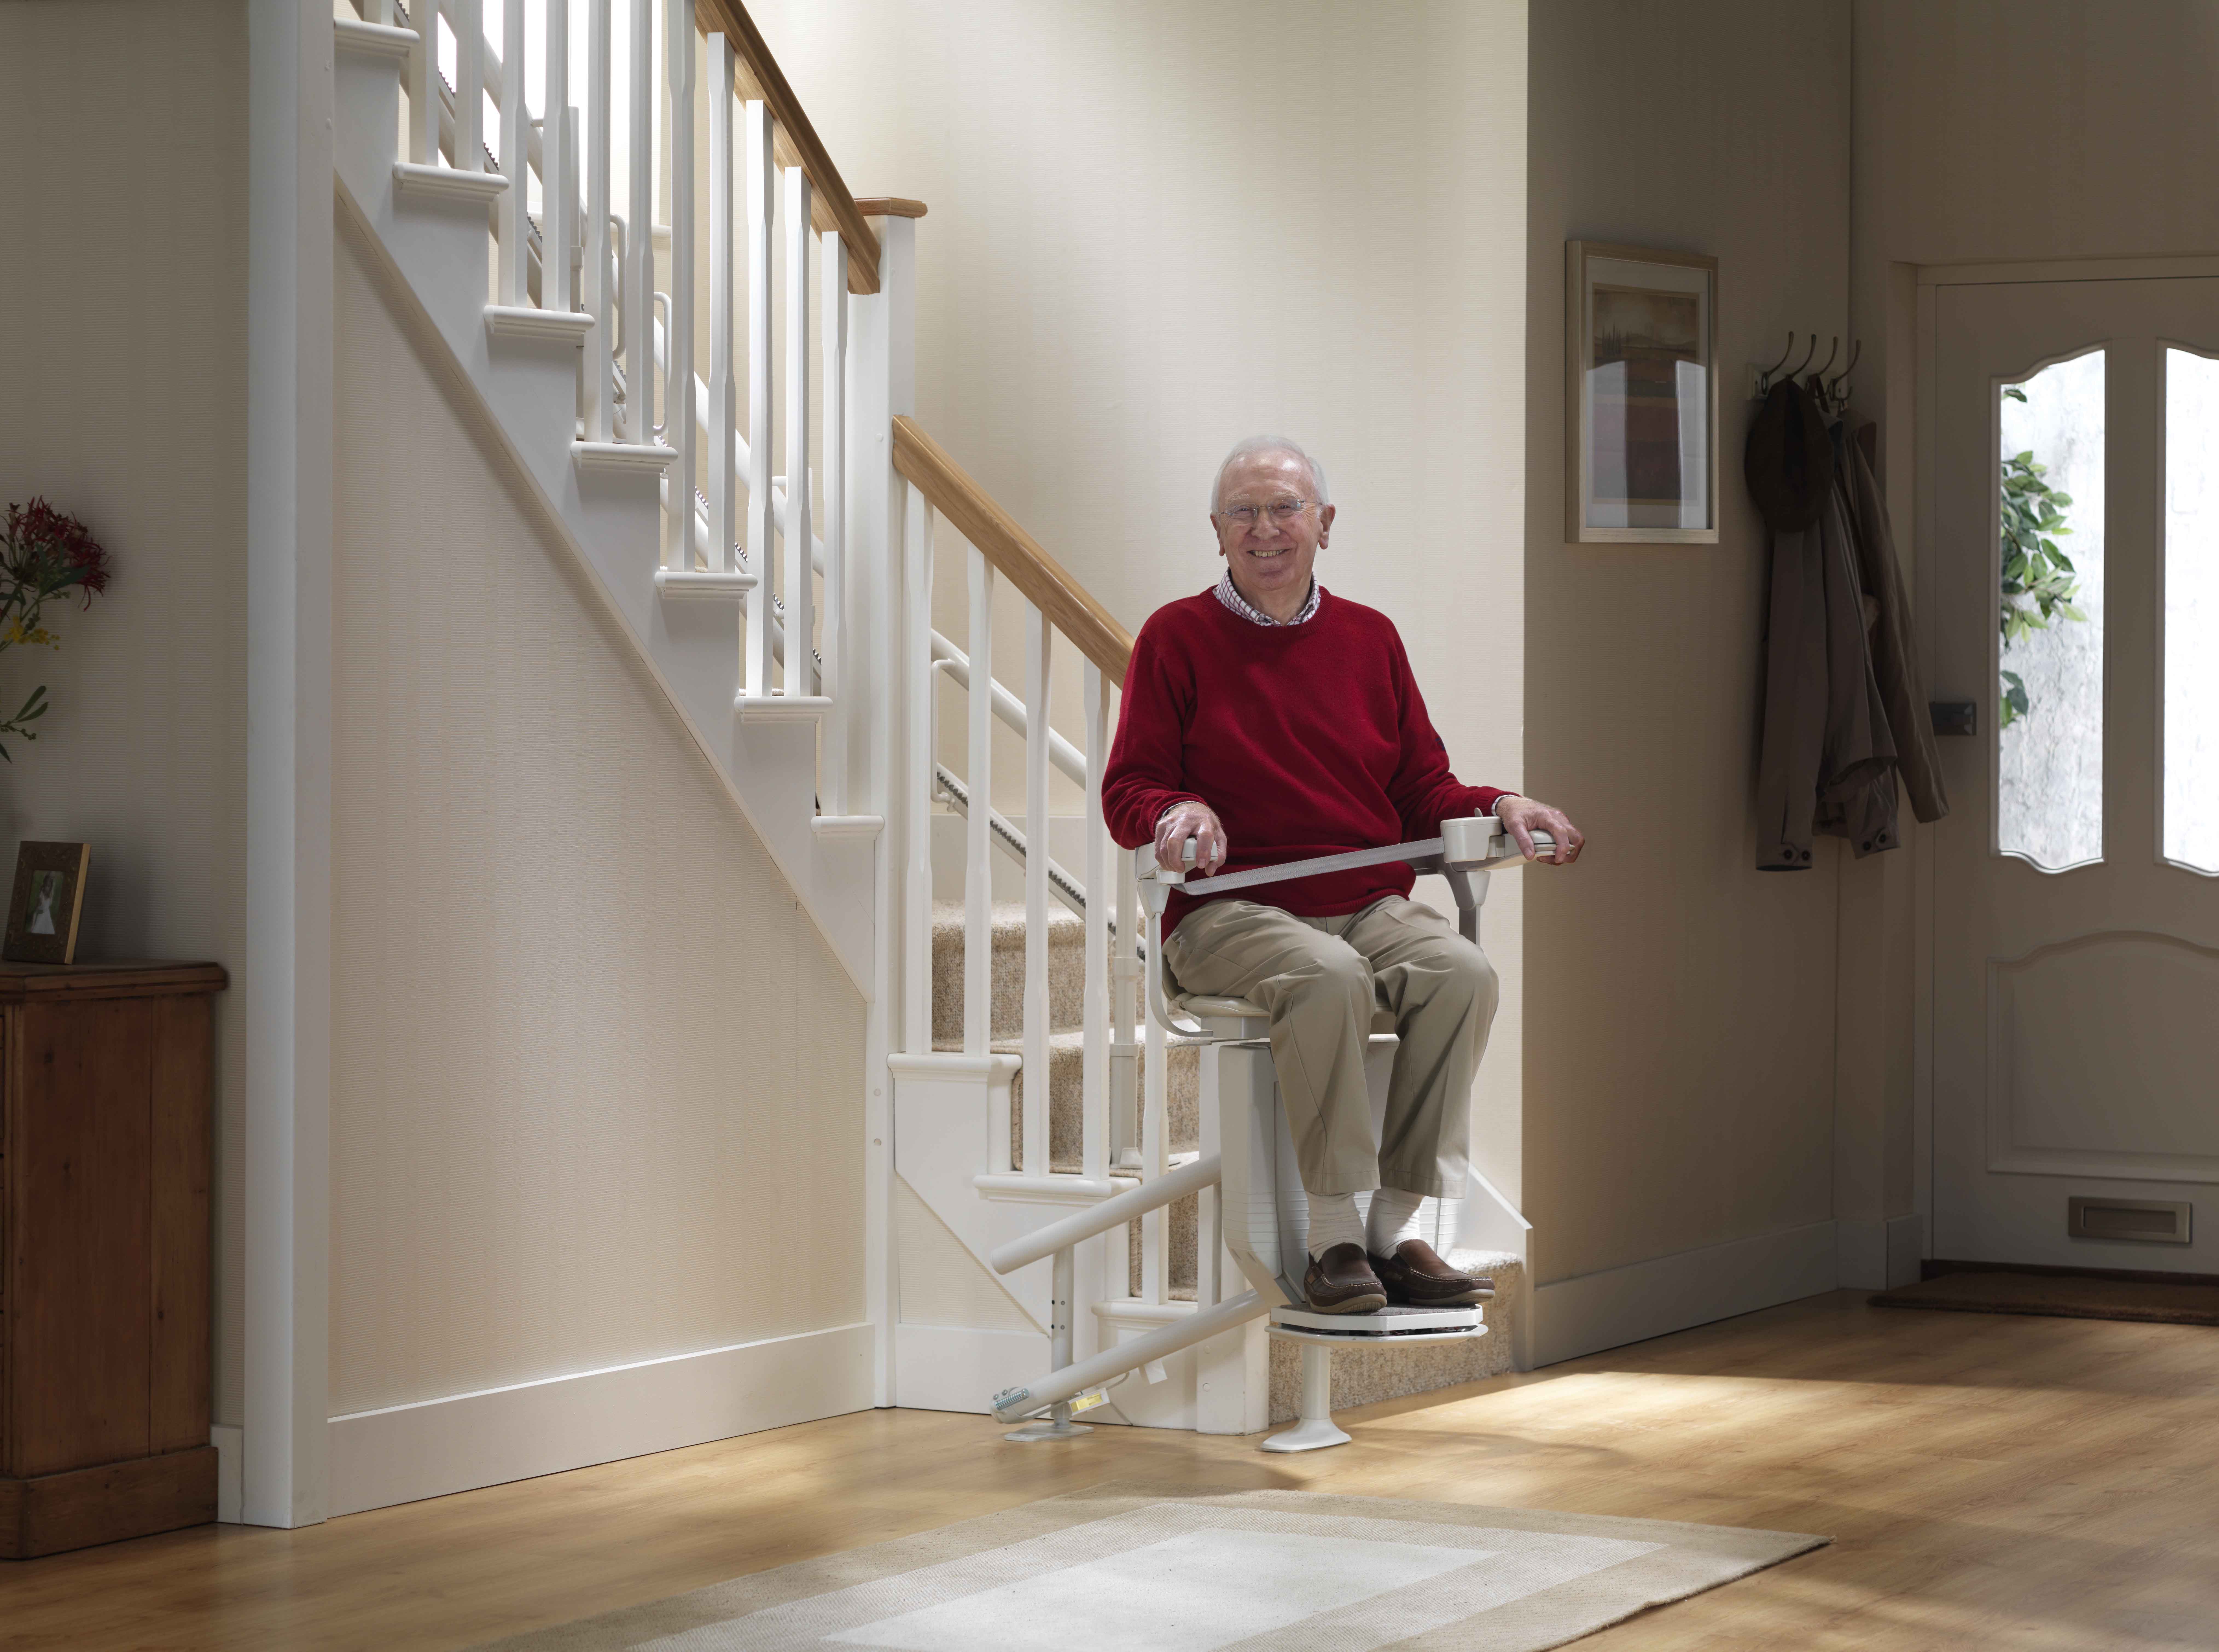 using a stairlift with a seatbelt